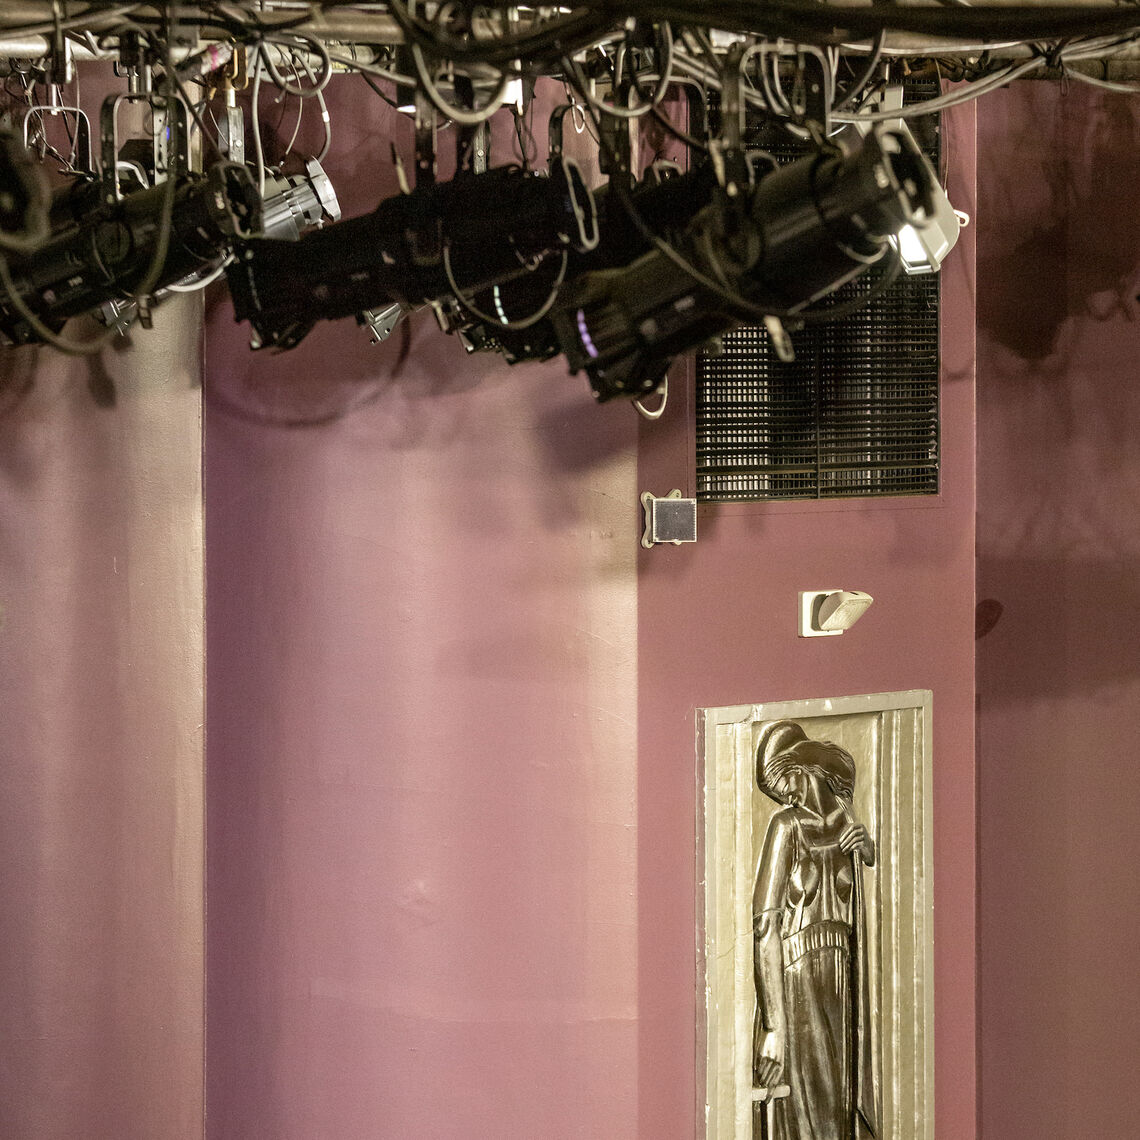 Stage lights hang high above the Art Deco interior of the theatre.